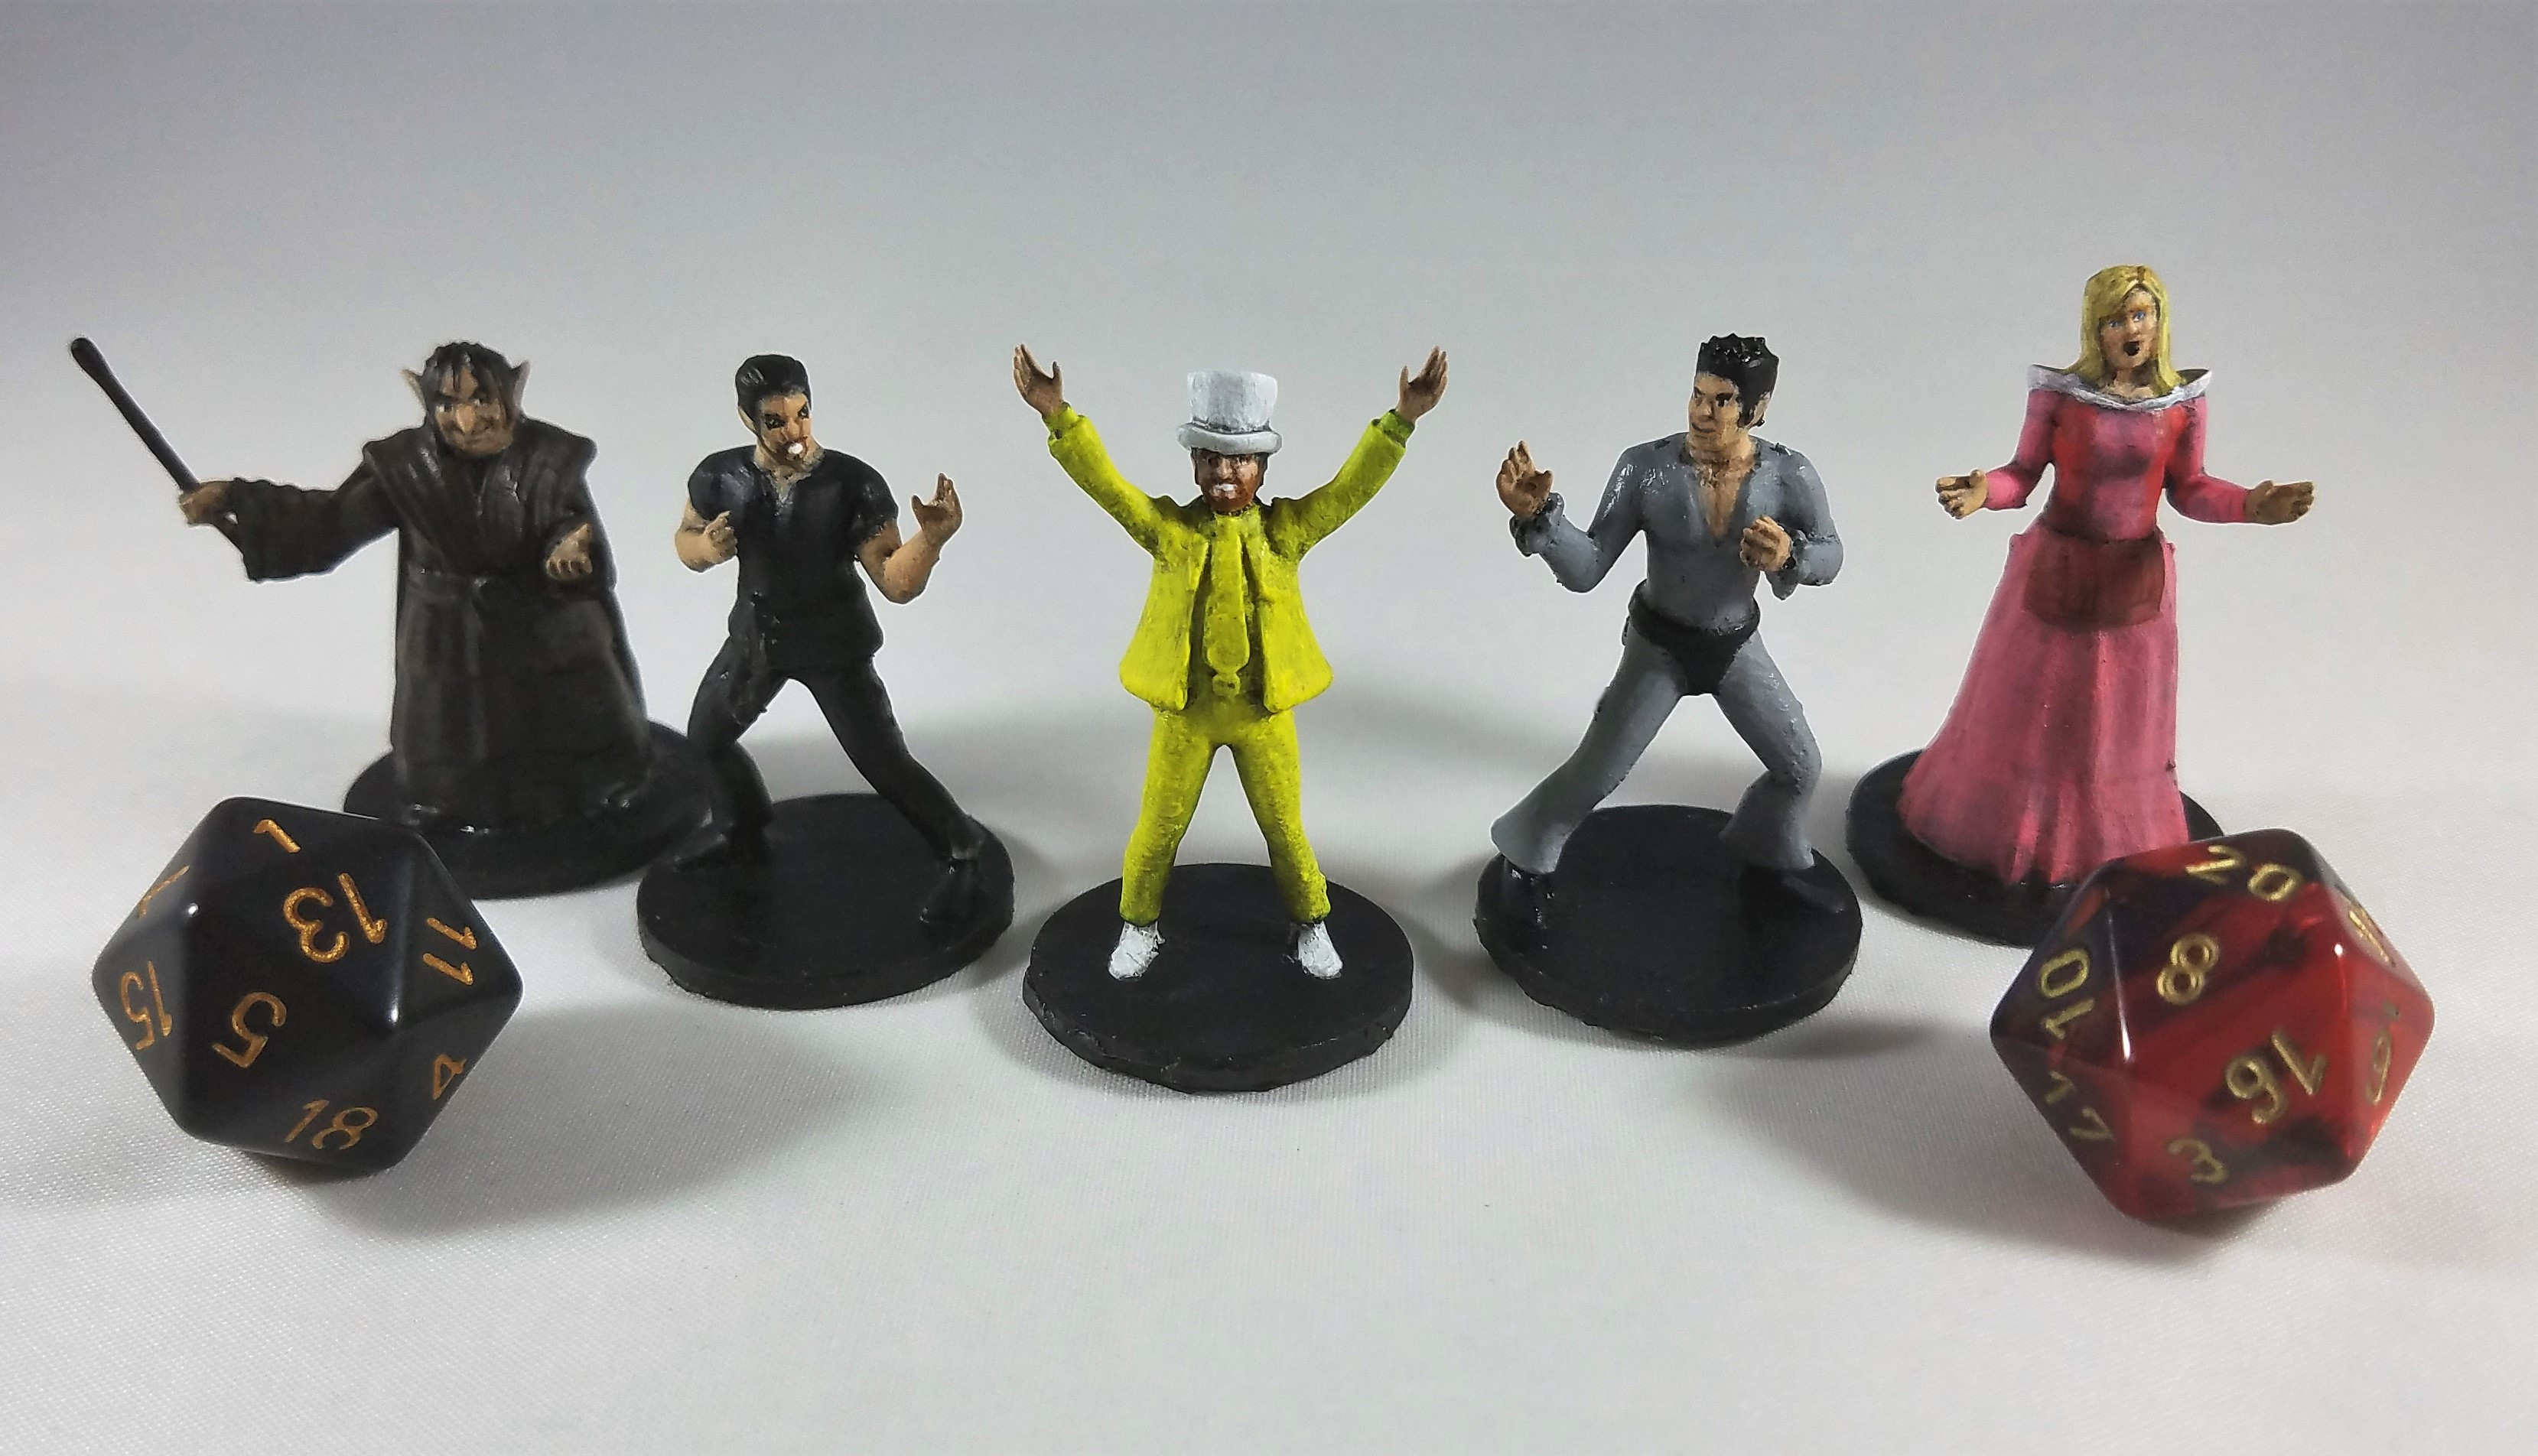 The Gang from "Its Always Sunny in Philadelphia" - The Night Man Cometh D&D Miniature Set